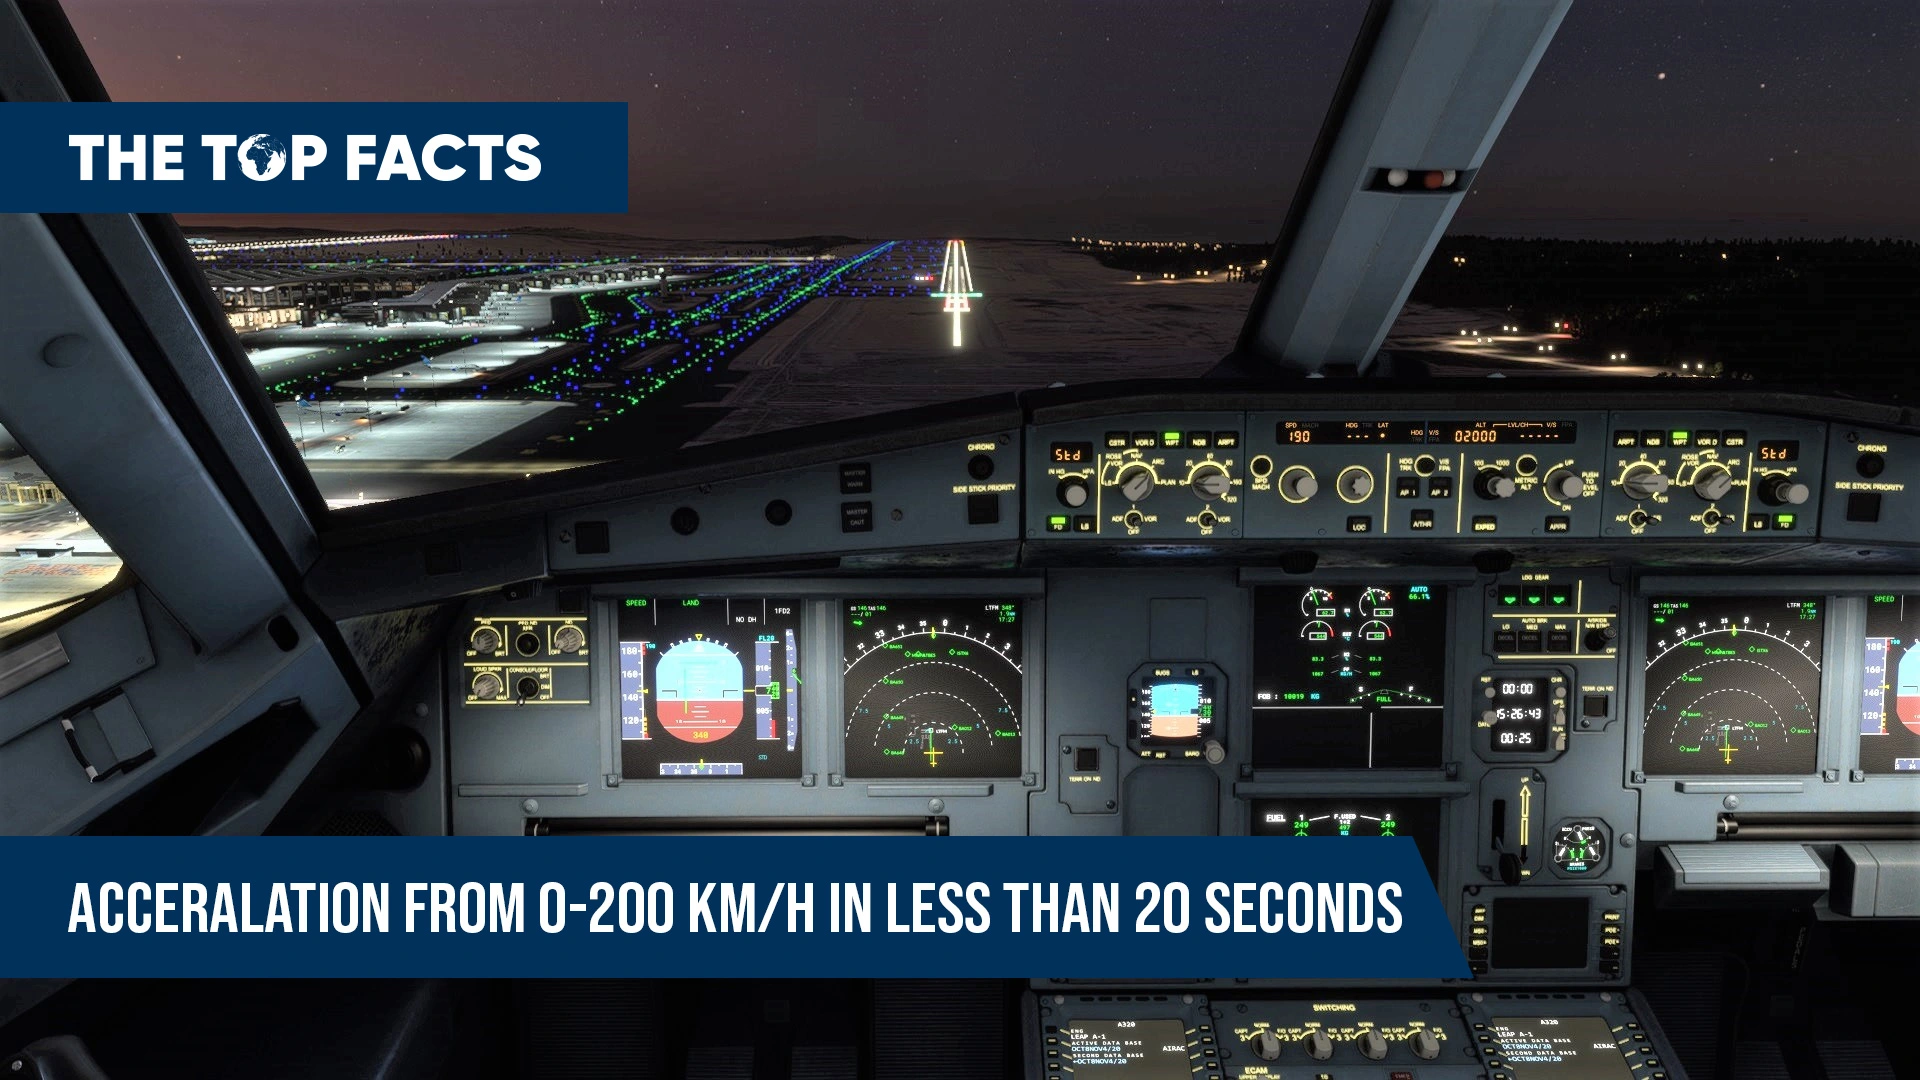 The Airbus A320 can accelerate from 0 to 200 km/h in less than 20 seconds.